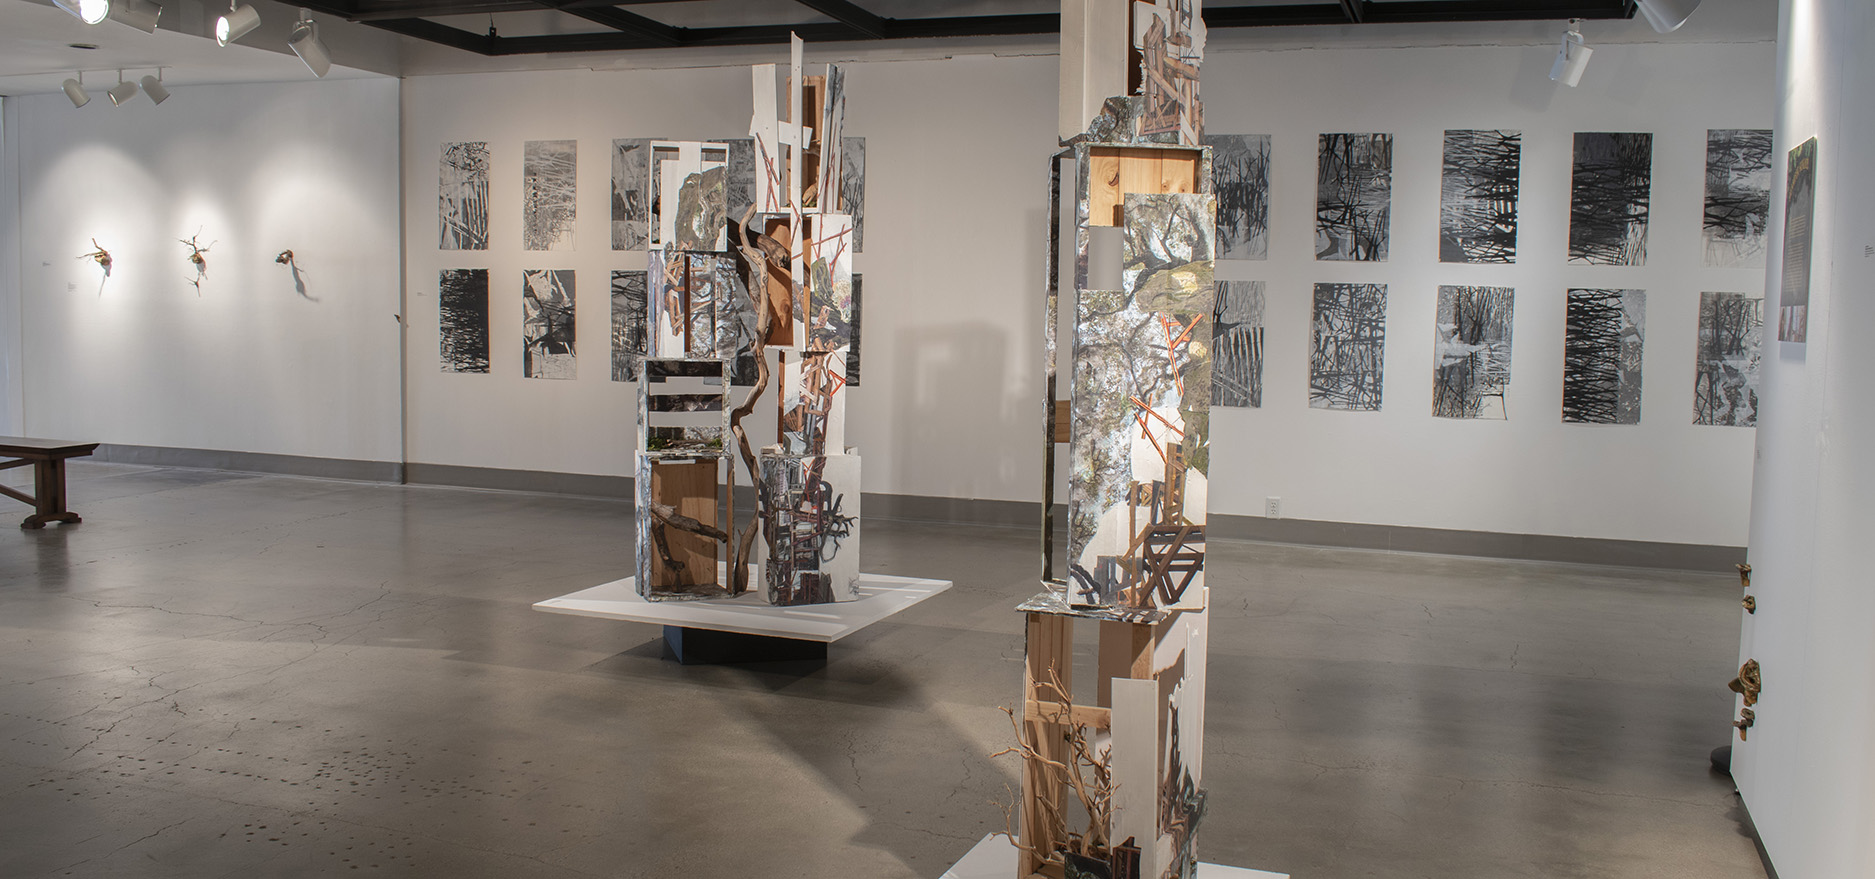 image of gallery space, sculptures of wooden crates with collages on them. Black and white rectangle artworks mounted on walls.